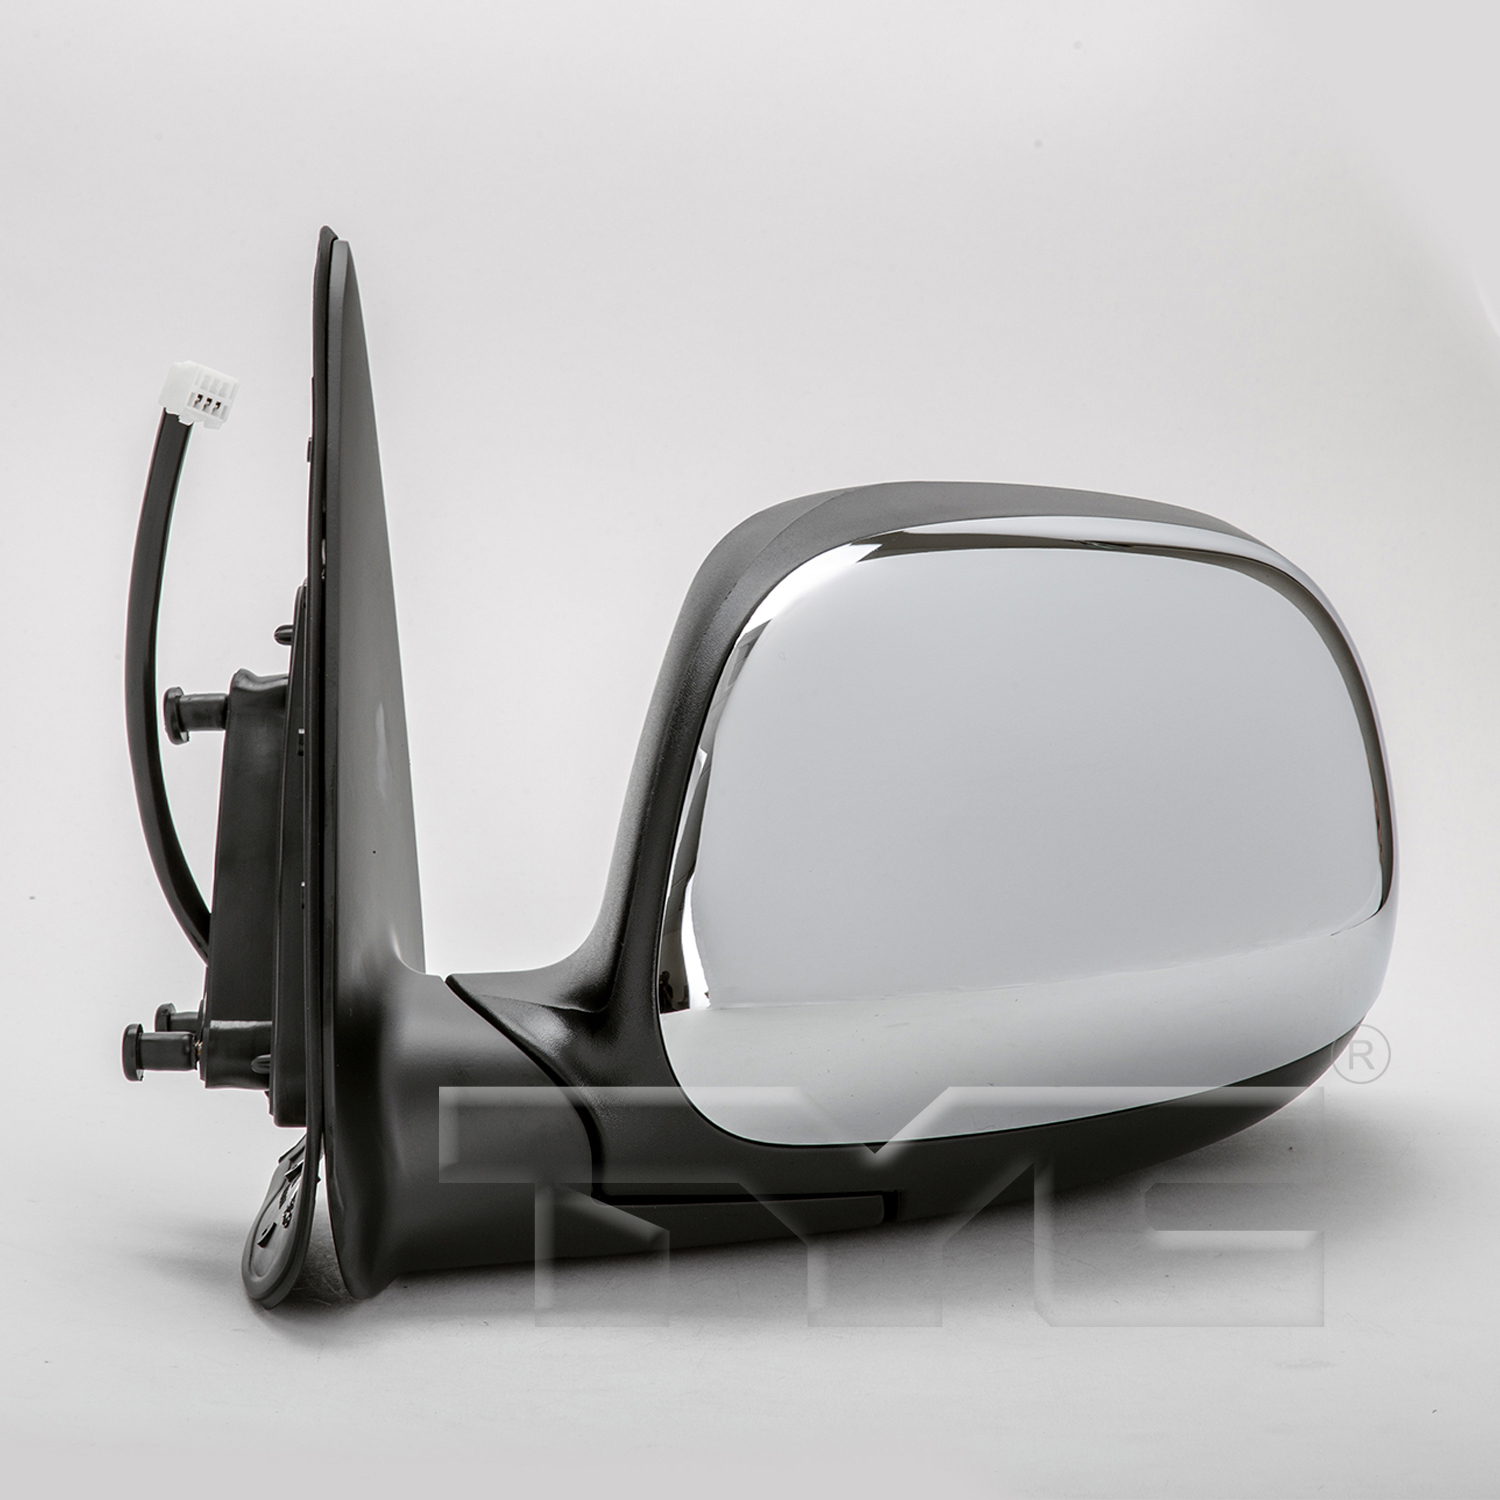 Aftermarket MIRRORS for TOYOTA - TUNDRA, TUNDRA,03-06,LT Mirror outside rear view